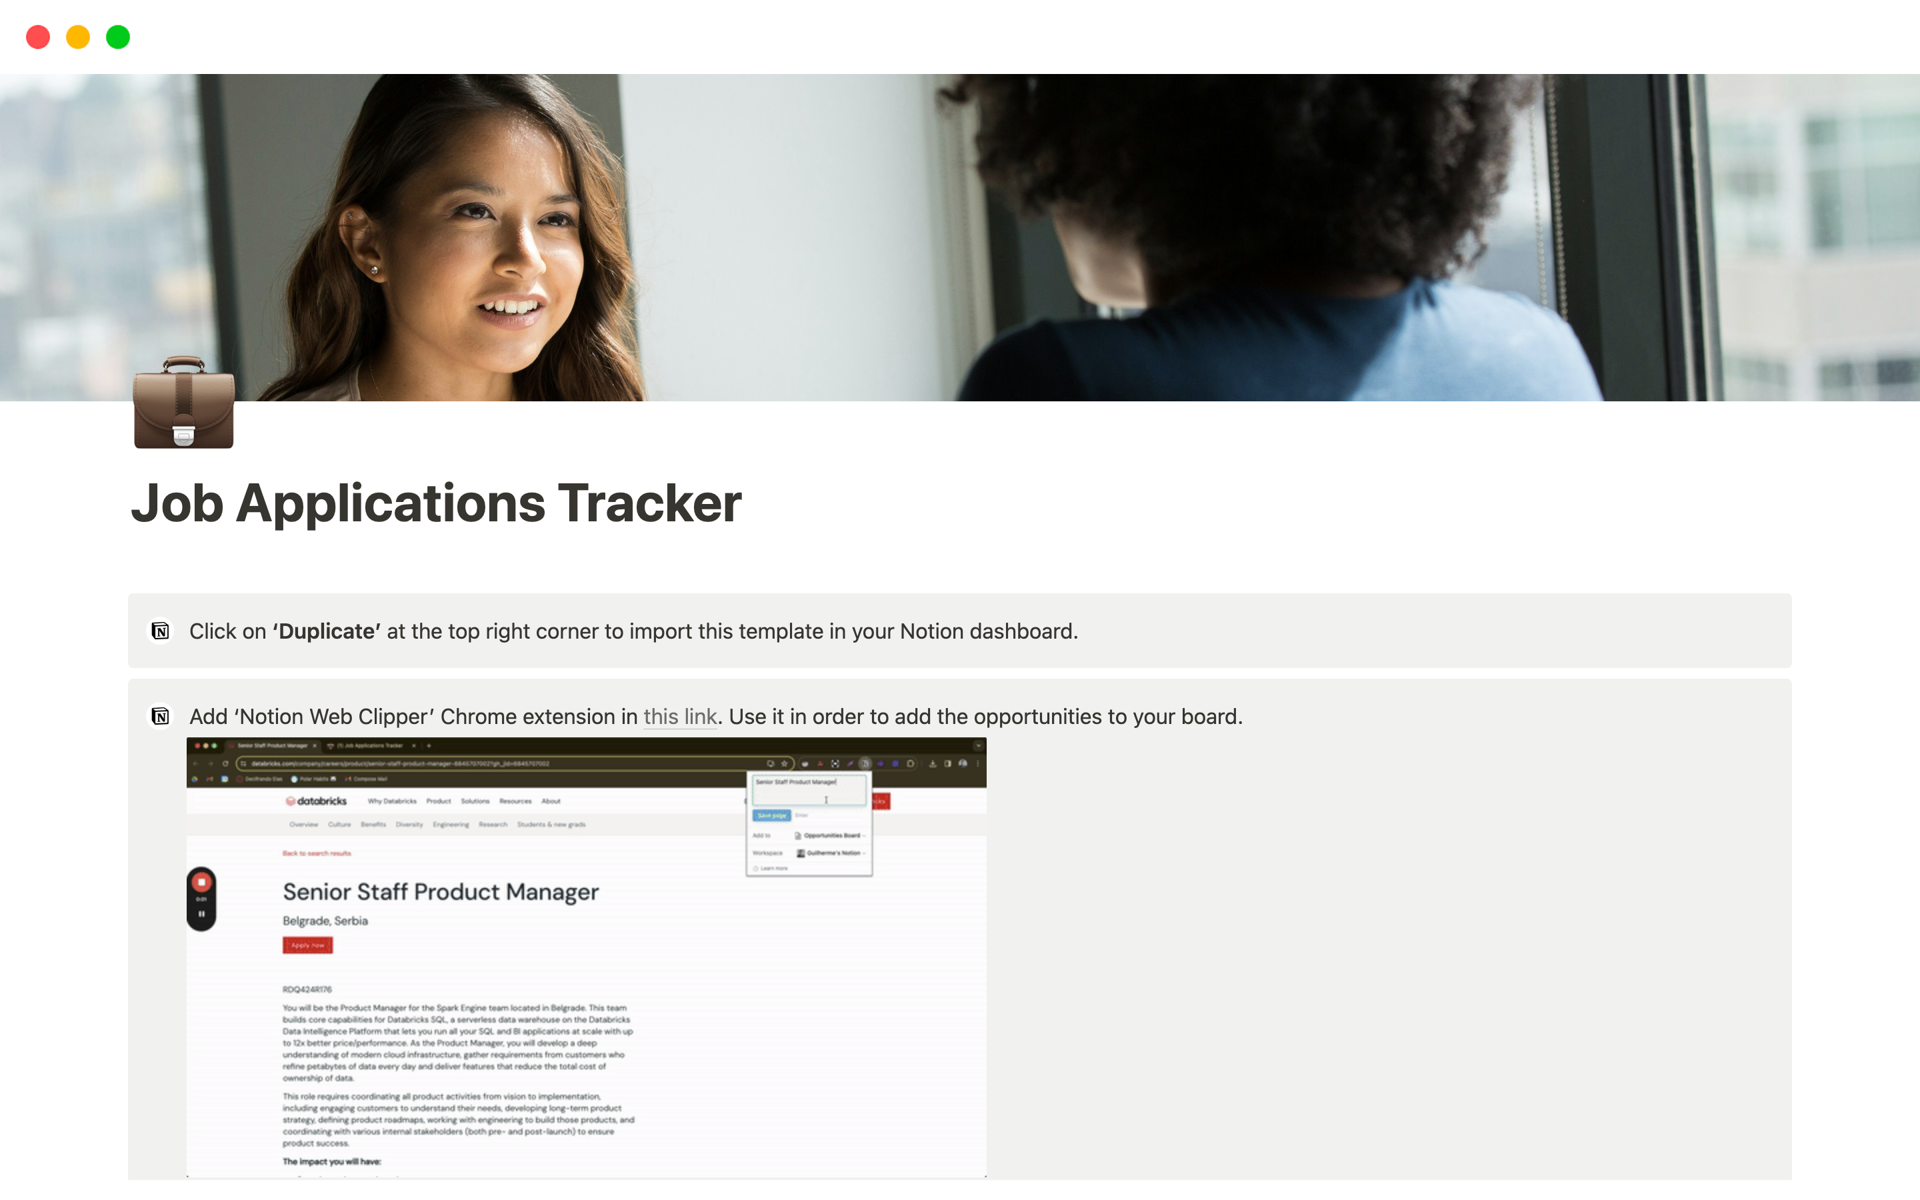 The Job Applications Tracker Notion template streamlines and enhances your job hunting process by providing a centralized, visual, and customizable platform to organize, track, and optimize all aspects of your job applications.